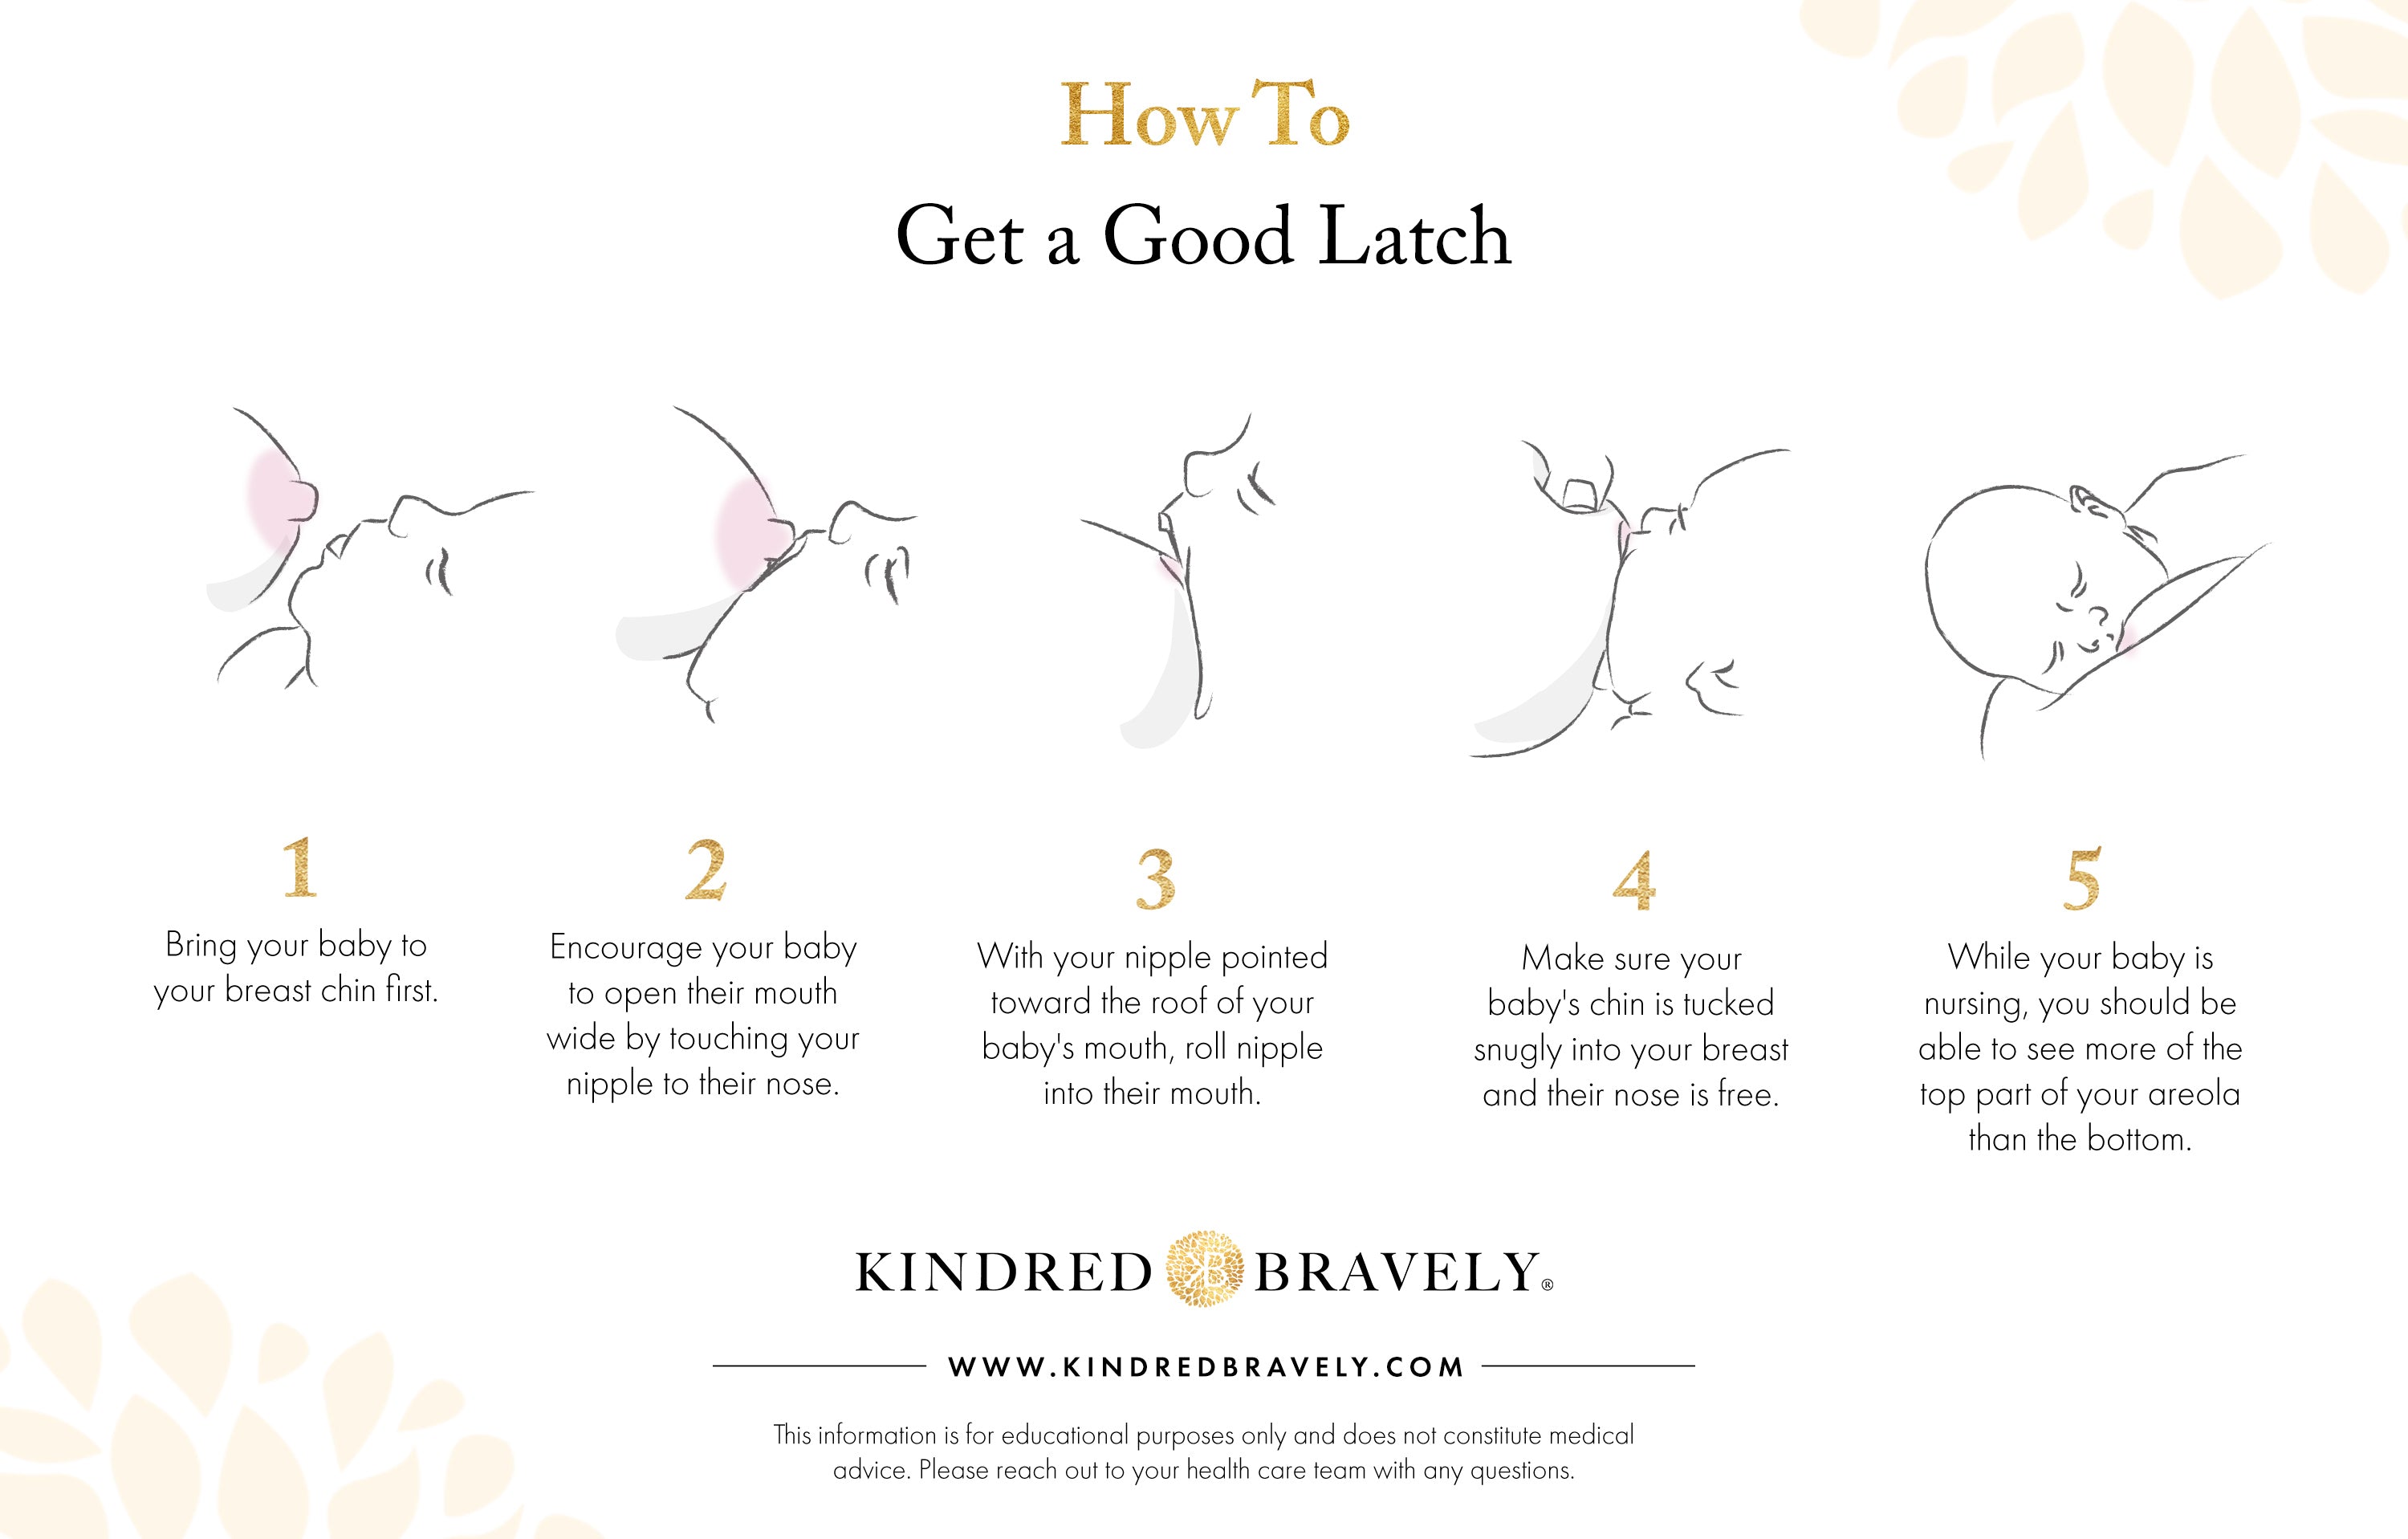 How to get a good latch